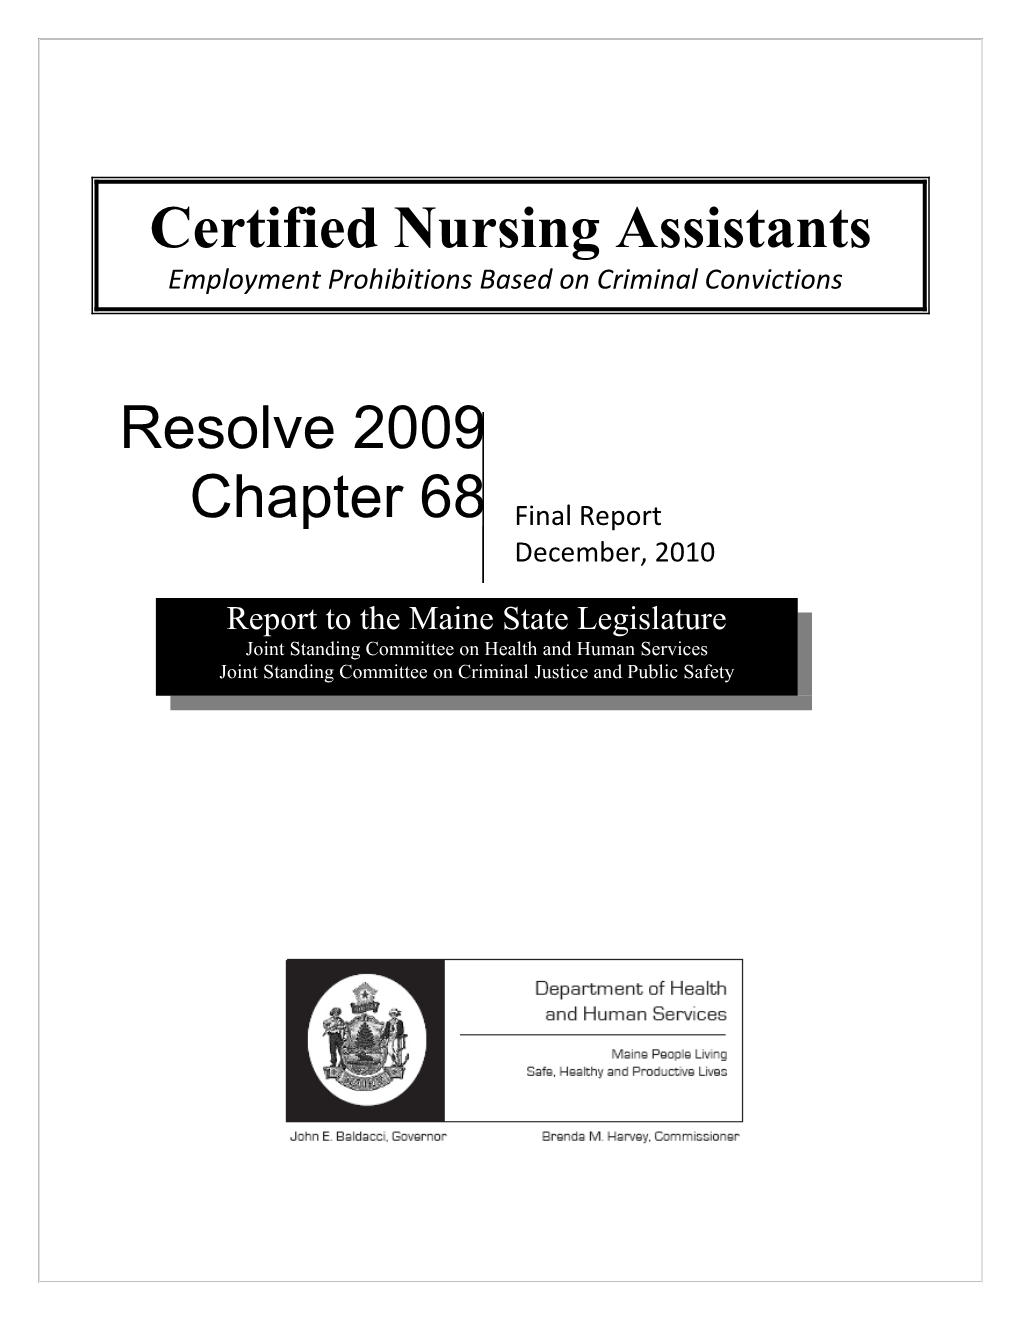 Report of the DHHS Workgroup on Certified Nursing Assistants (CNA) and Employment Restrictions